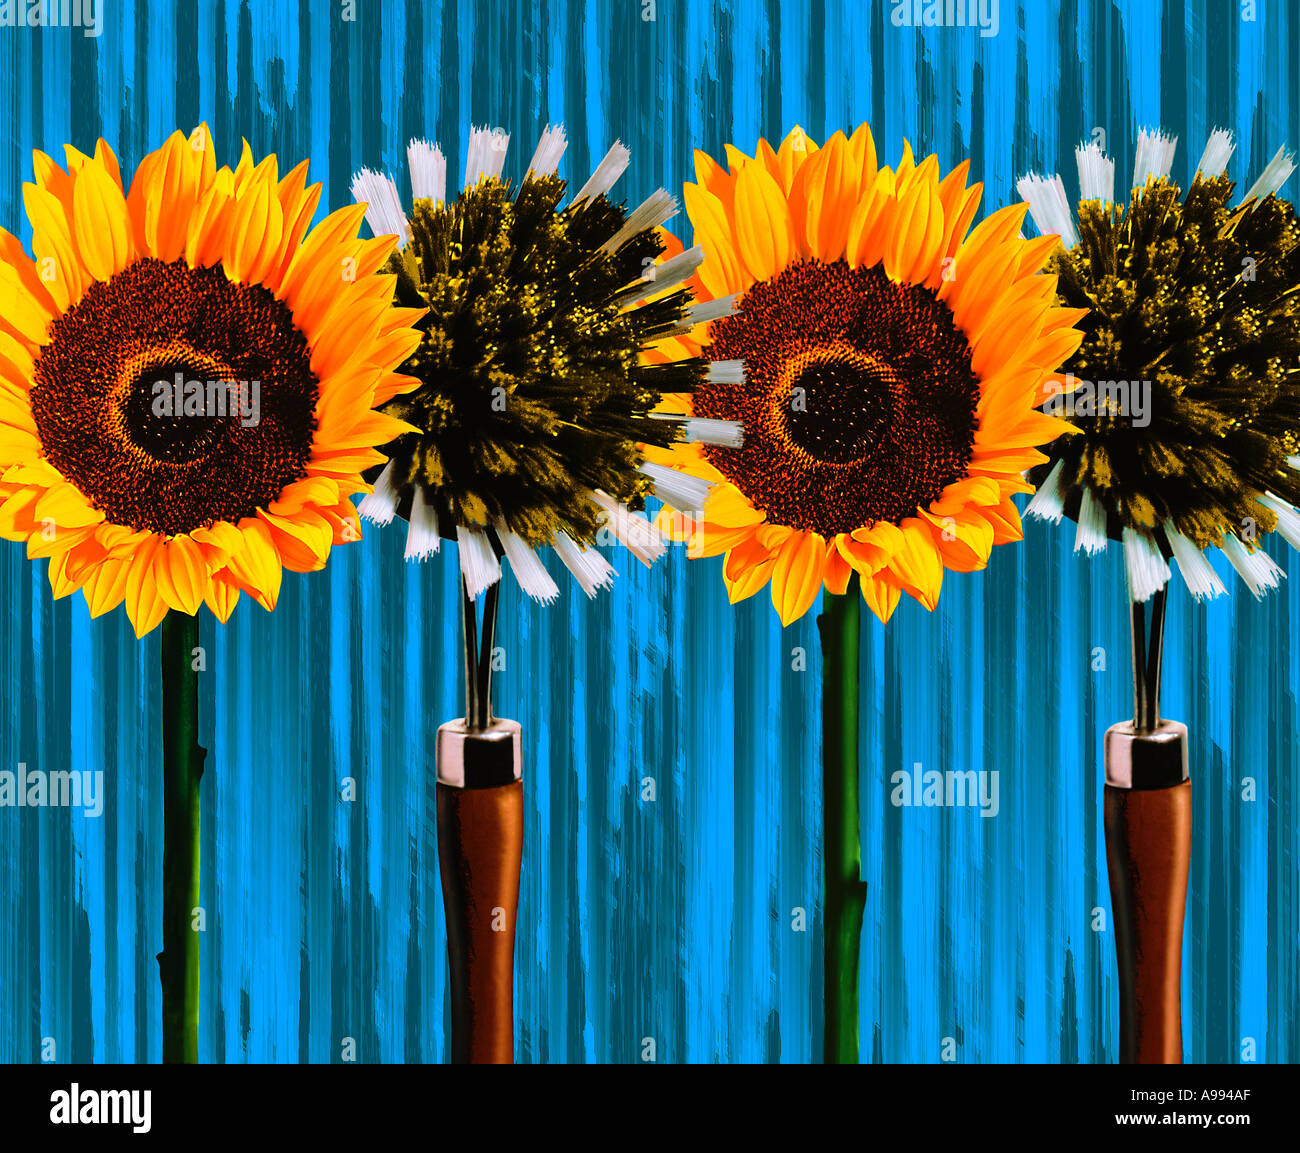 Computer generated image of two sunflowers and two kitchen scrub brushes against a green background Stock Photo